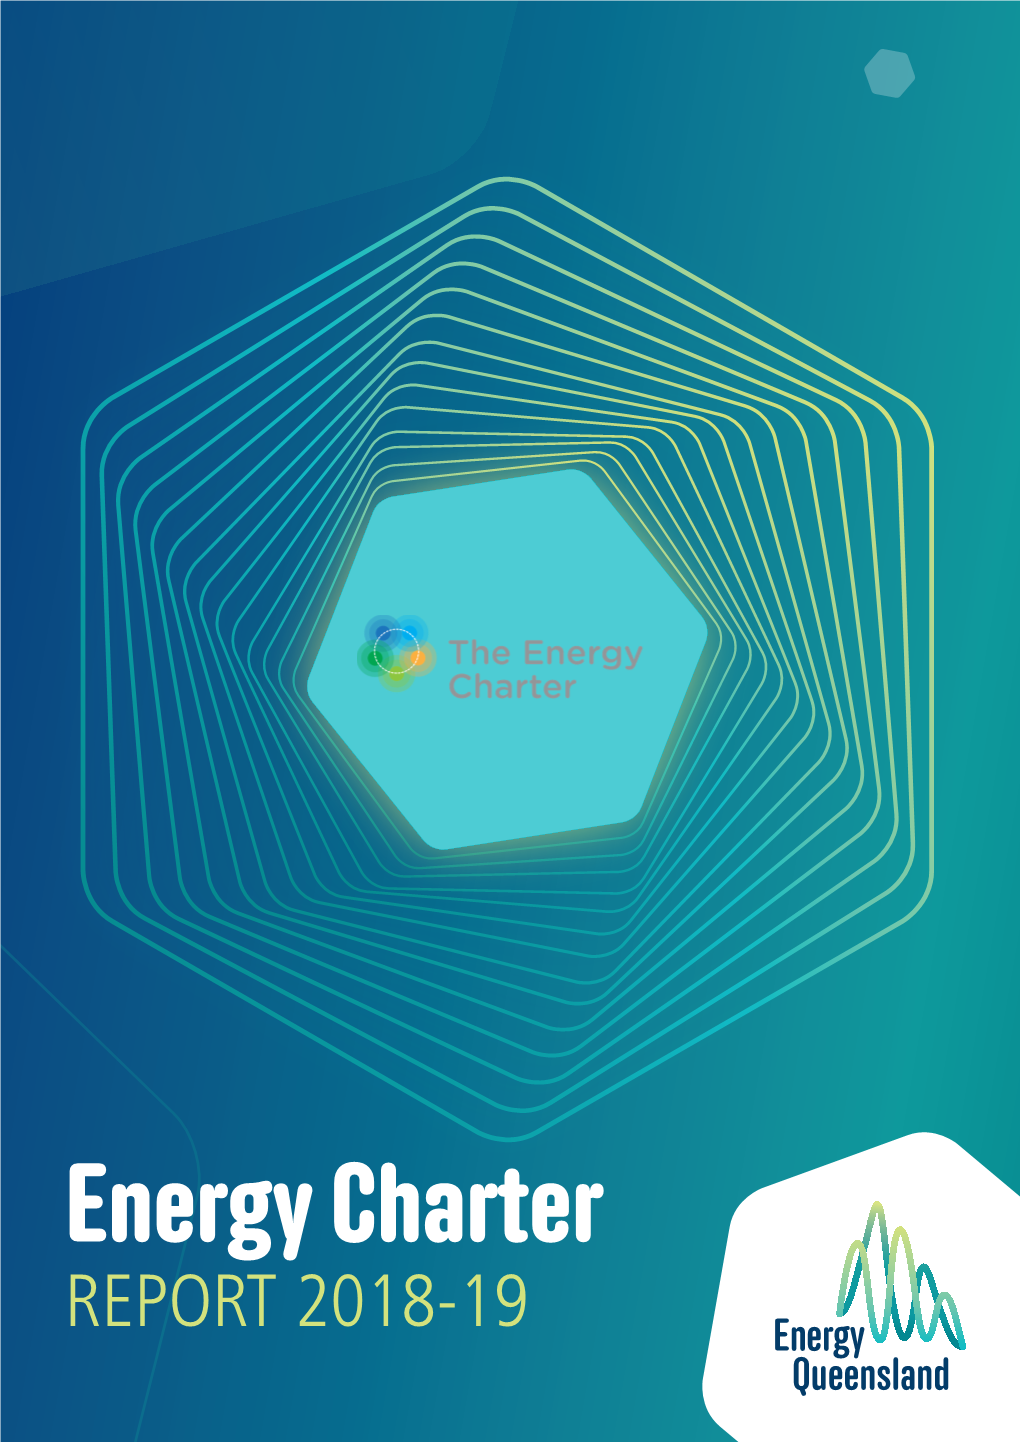 Energy Queensland Executive Introduction 3 Group’S (The Group’S) Energy Charter Our Approach to the Energy Charter 6 Disclosures from 1 July 2018 to 30 June 2019